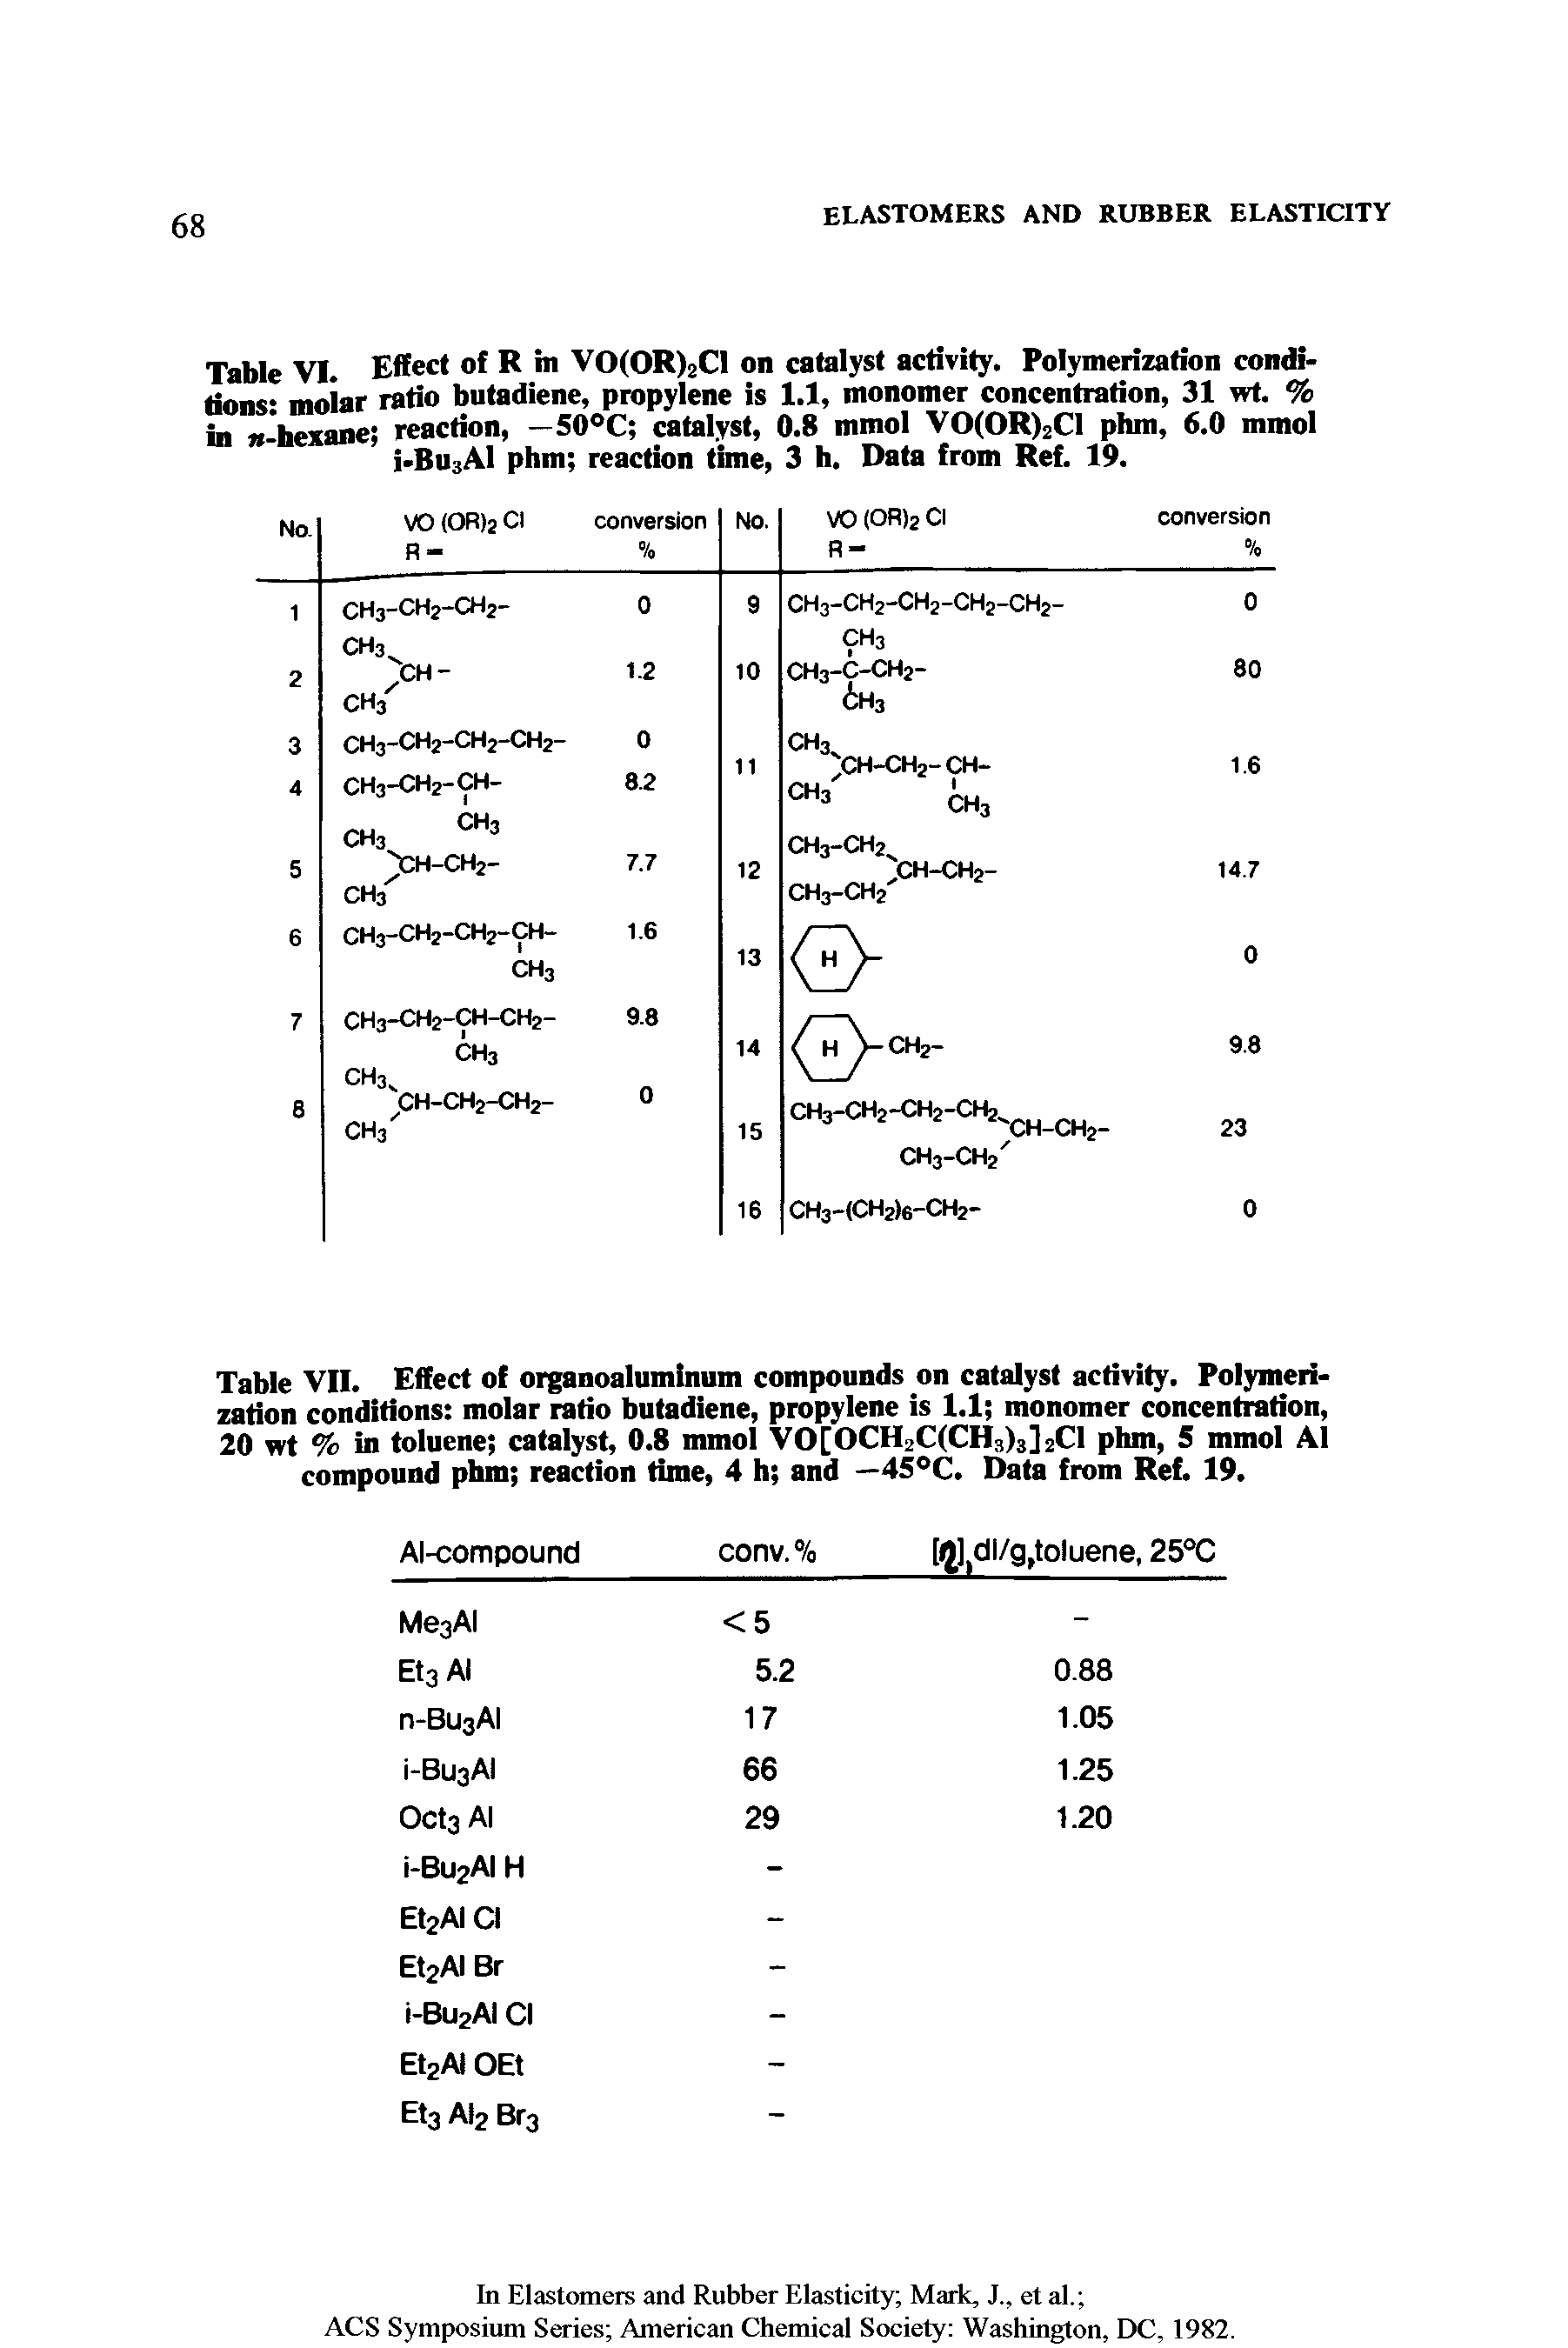 Table VII. Effect of organoaluminum compounds on catalyst activity. Polymerization conditions molar ratio butadiene, propylene is 1.1 monomer concentration, 20 wt % in toluene catalyst, 0.8 mmol VO[OCH2C(CH3)3]2Cl phm, 5 mmol Al compound phm reaction time, 4 h and —45°C. Data from Ref. 19.